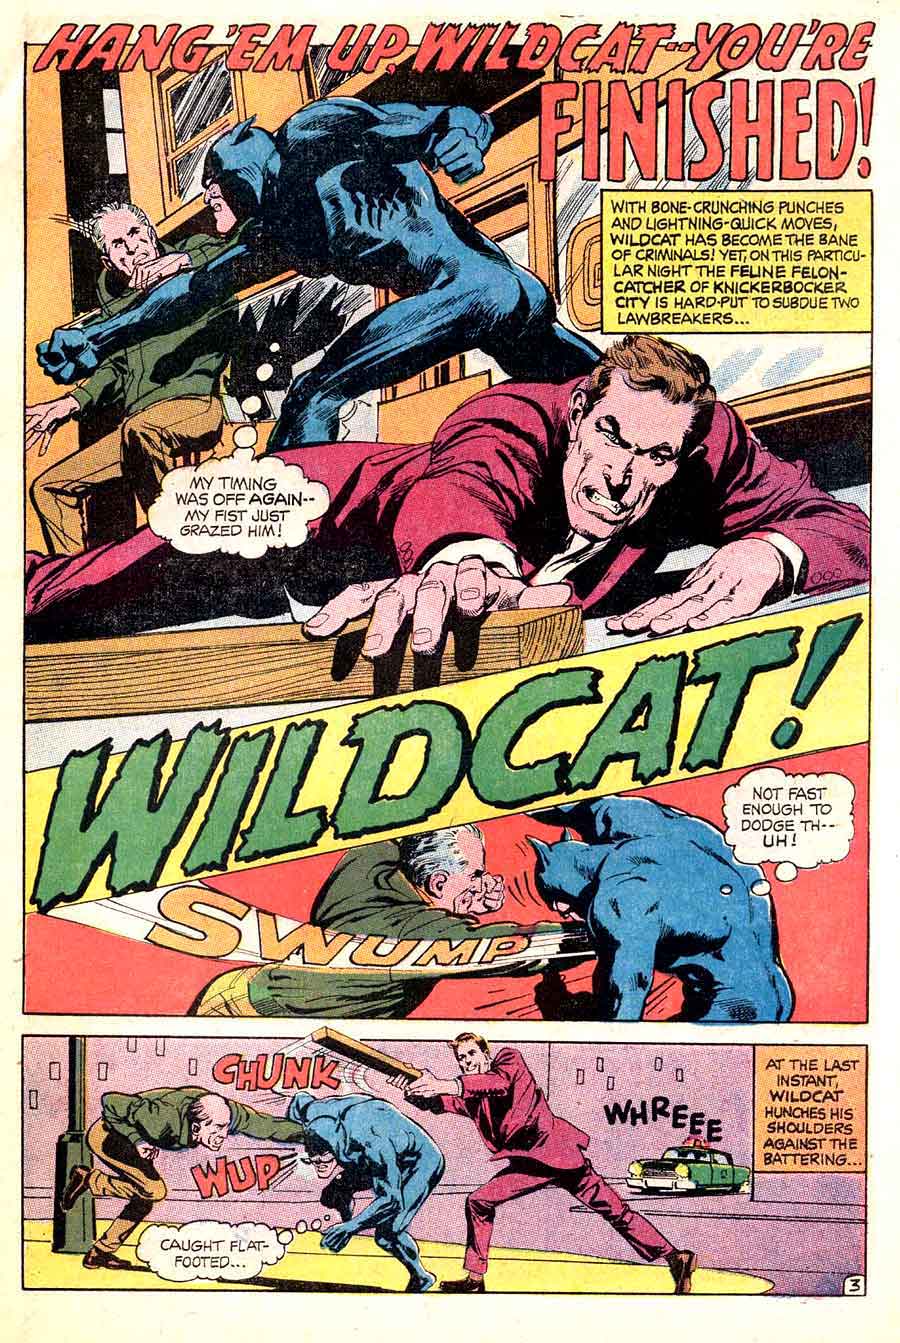 Spectre v1 #3 dc 1960s silver age comic book page art by Neal Adams